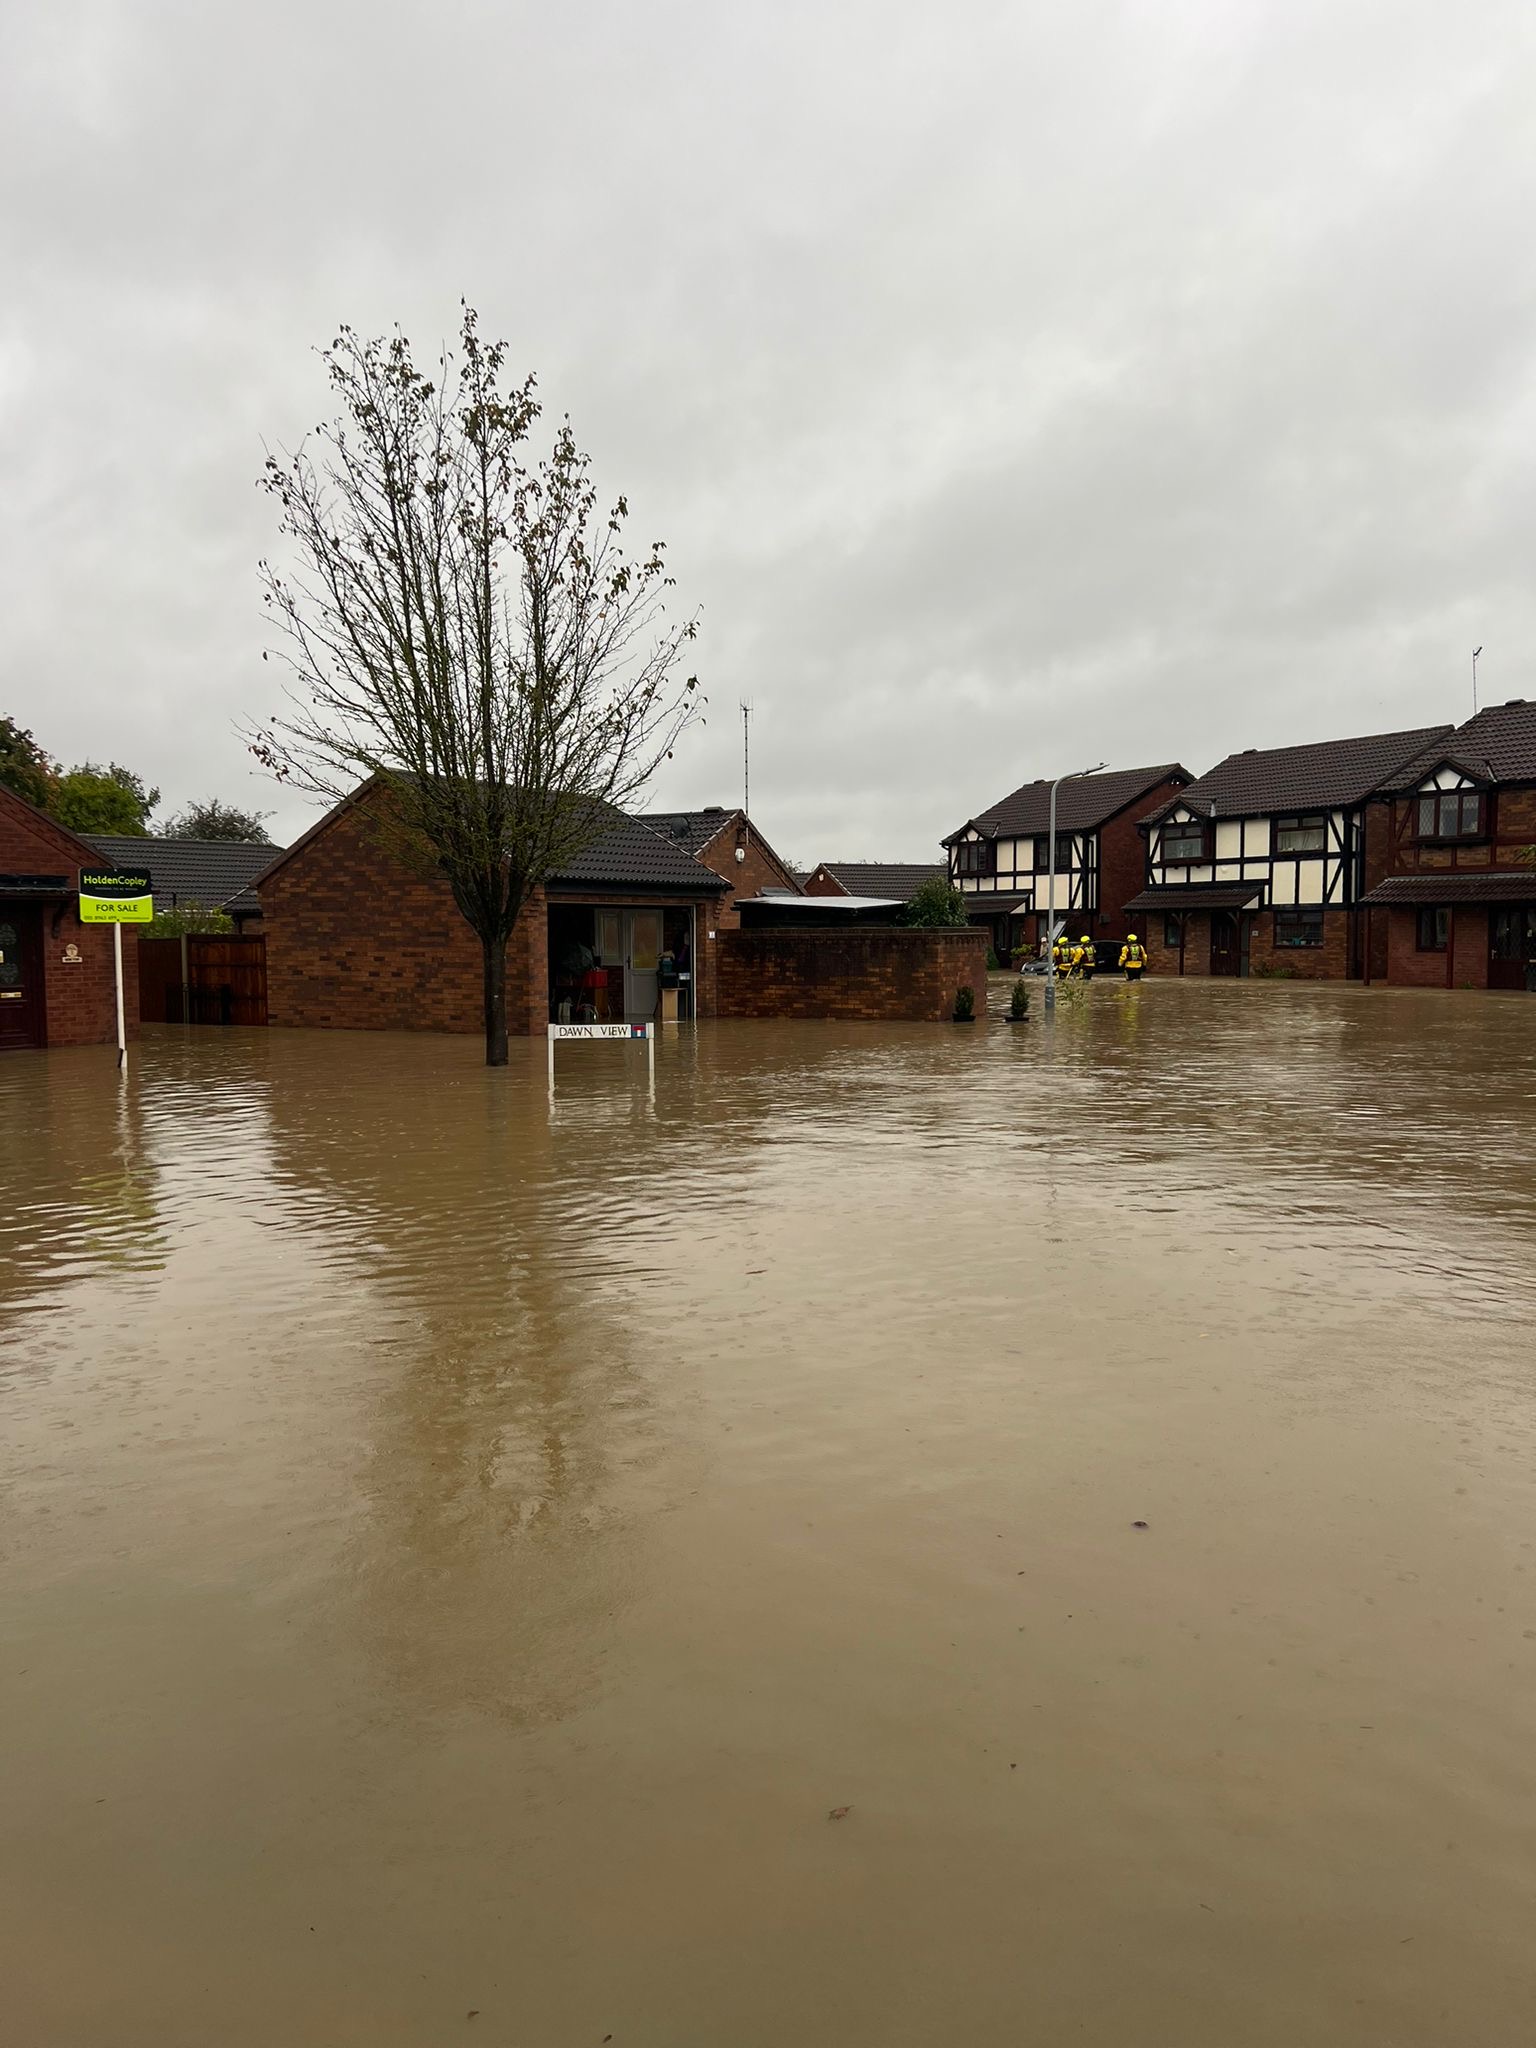 Floods in Nottinghamshire, UK, following heavy rain from Storm Babet. Credit: Nottinghamshire Fire and Rescue Service